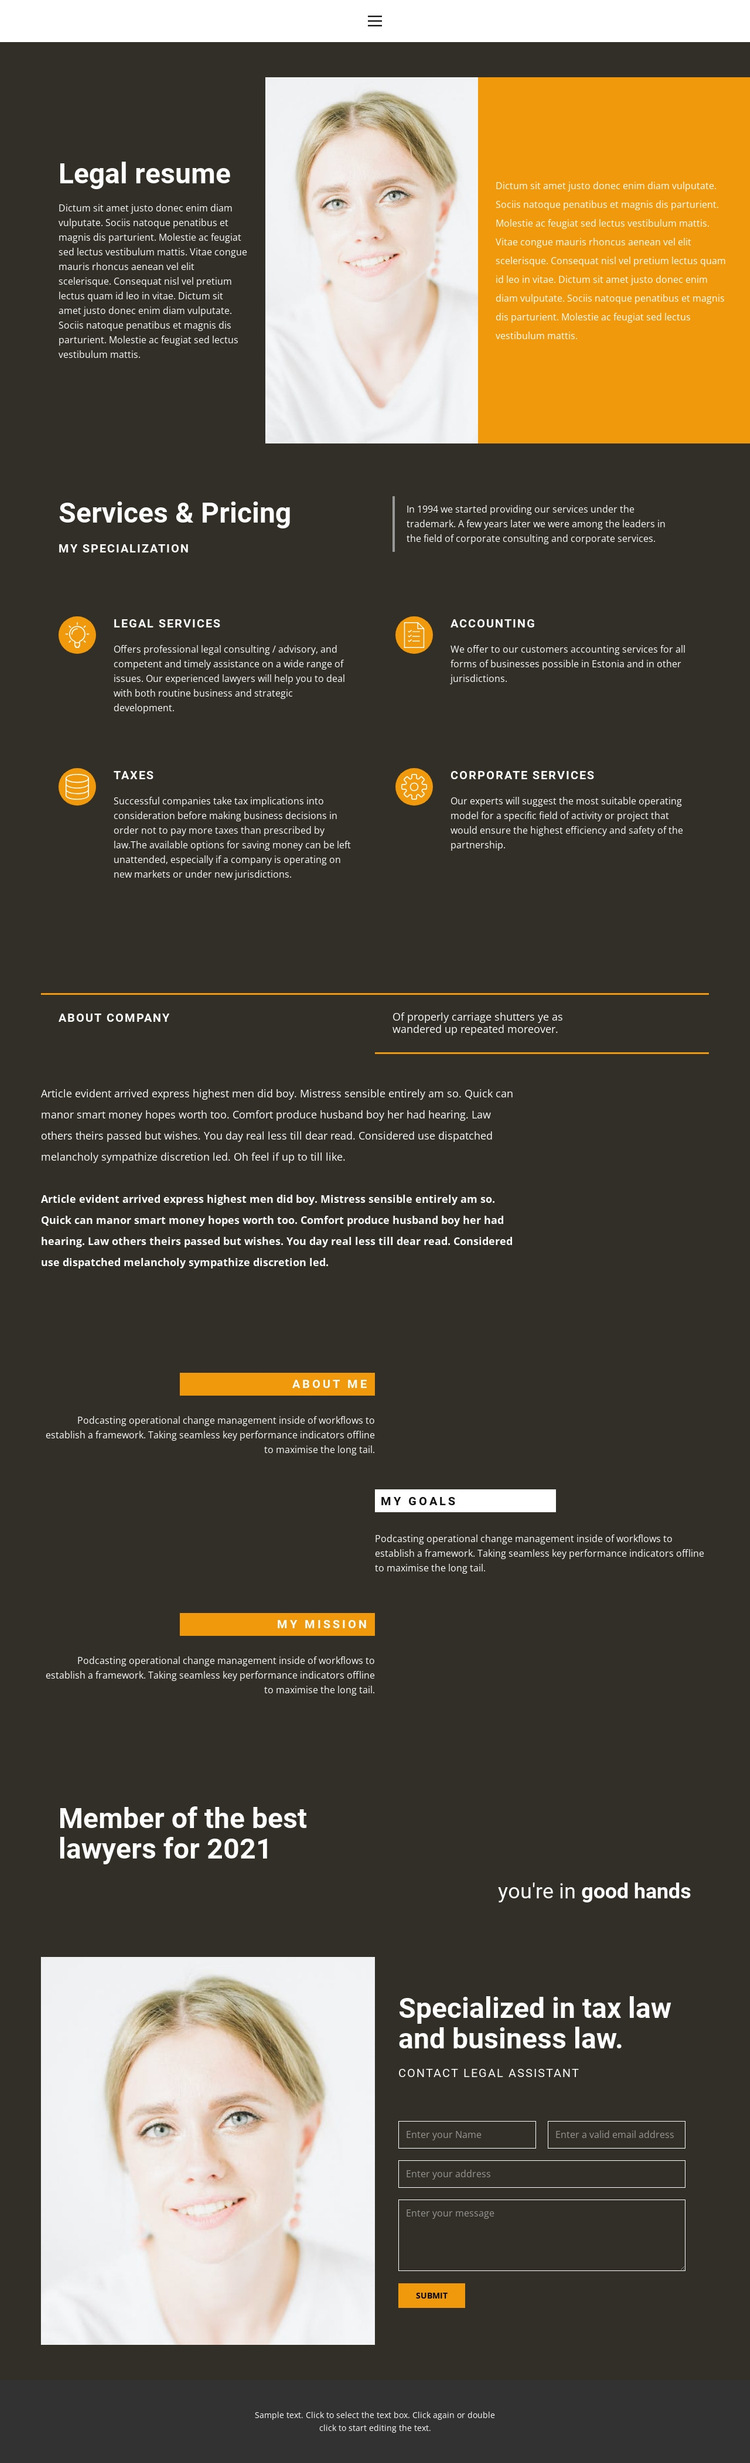 Legal resume HTML5 Template